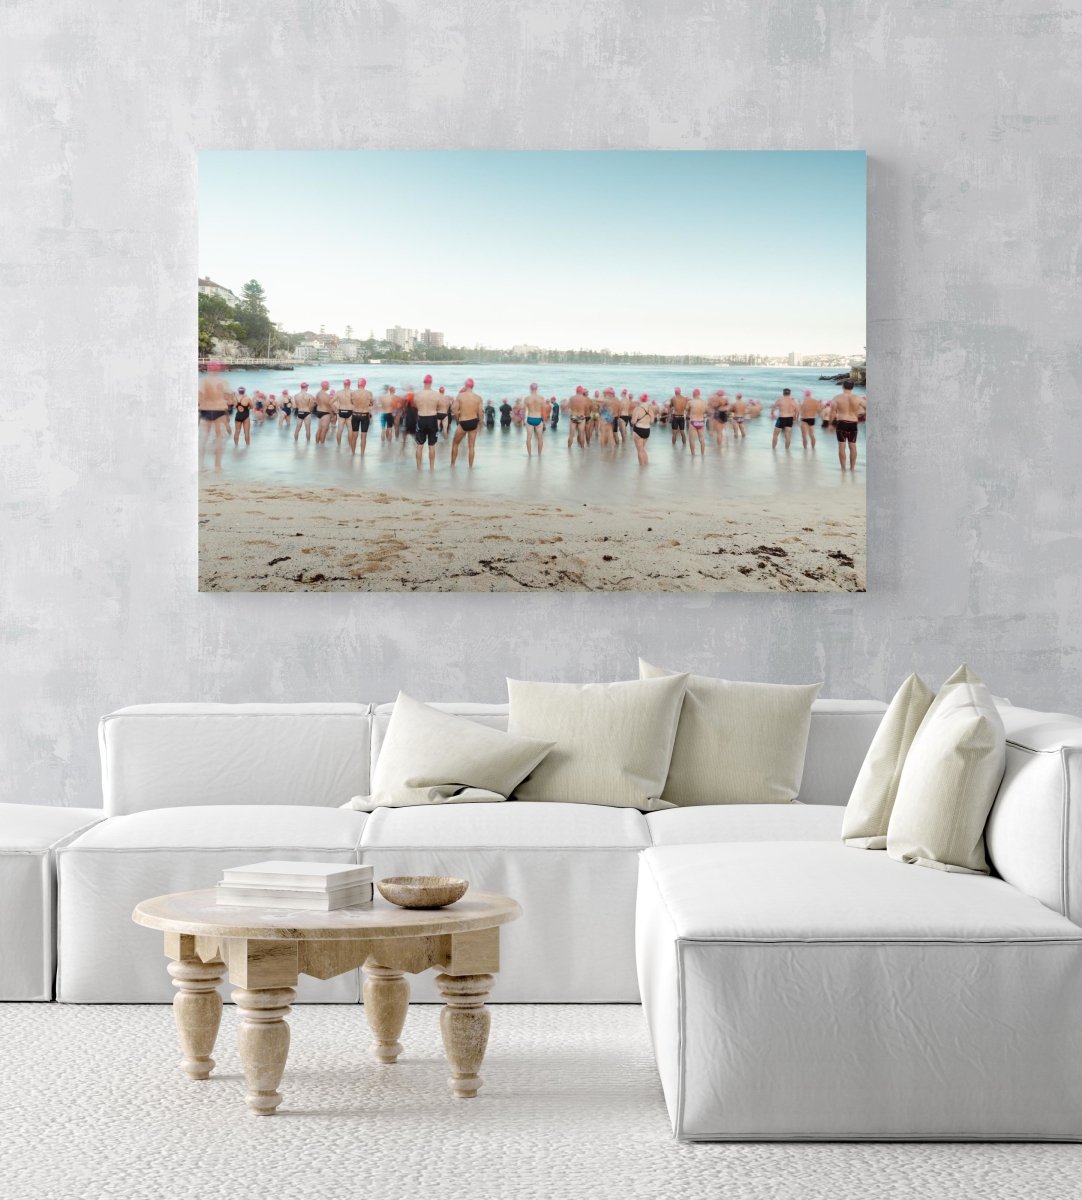 Lots of pink cap swimmers about to get in water at Shelly Beach Sydney in an acrylic/perspex frame